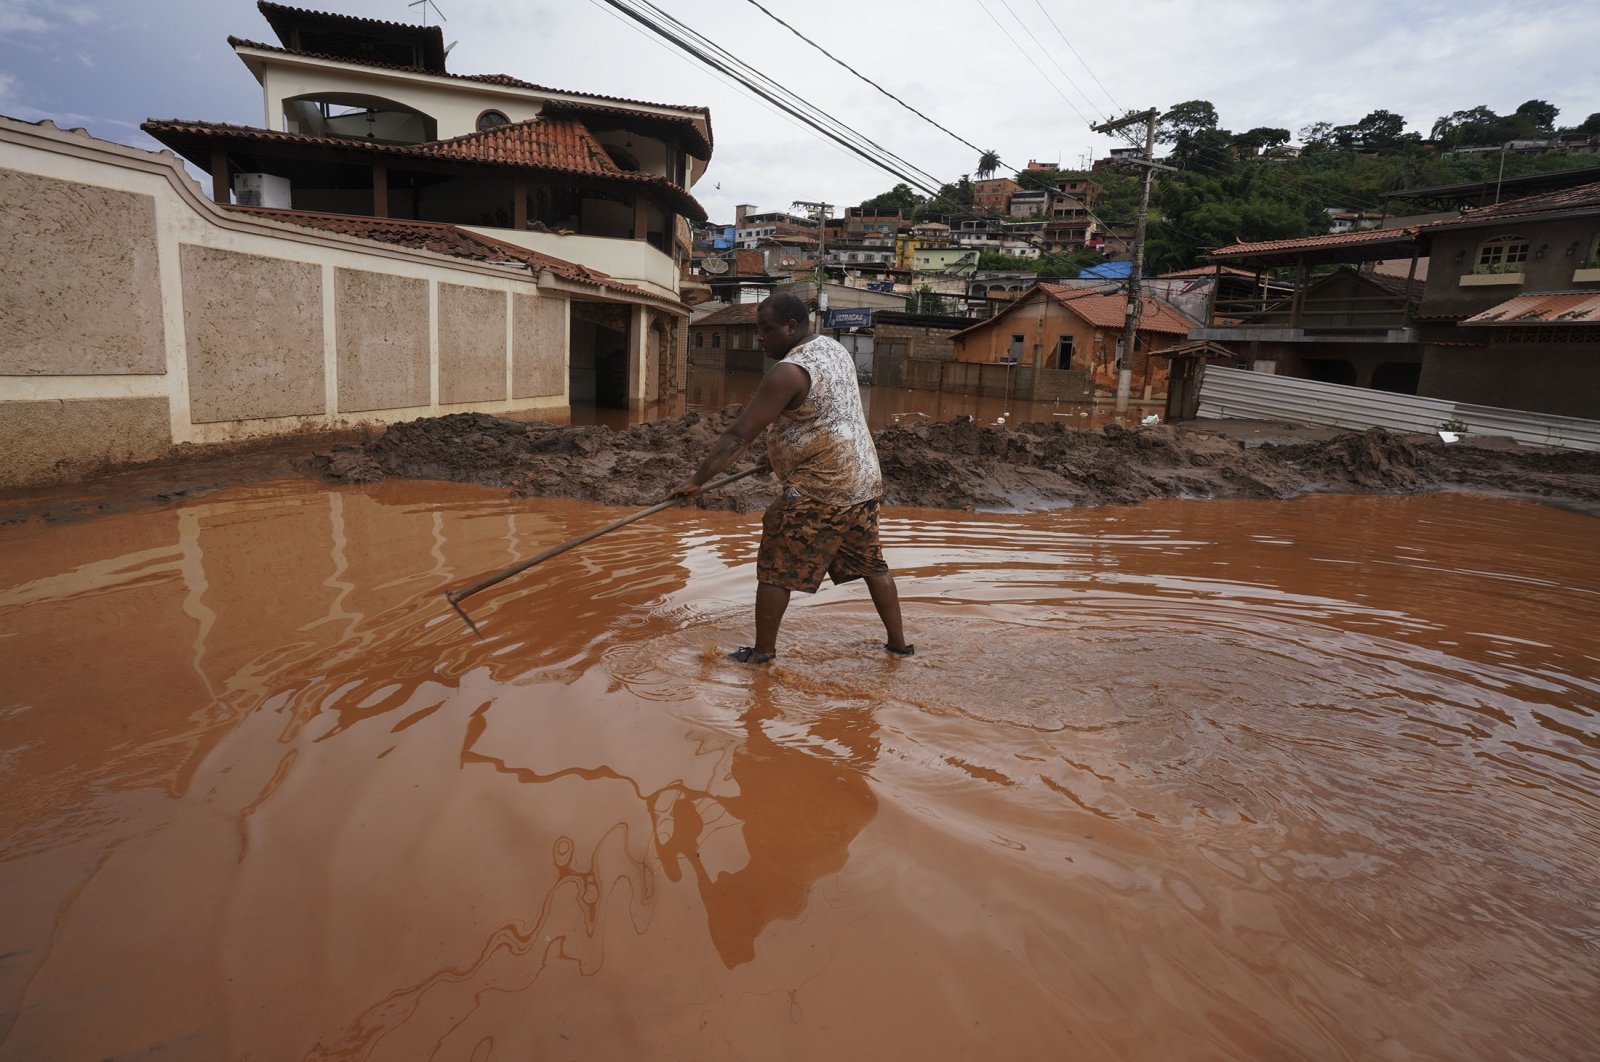 A resident removes mud from a street after flooding in Raposos, Minas Gerais state, Brazil, Jan. 11, 2022. (AP Photo)